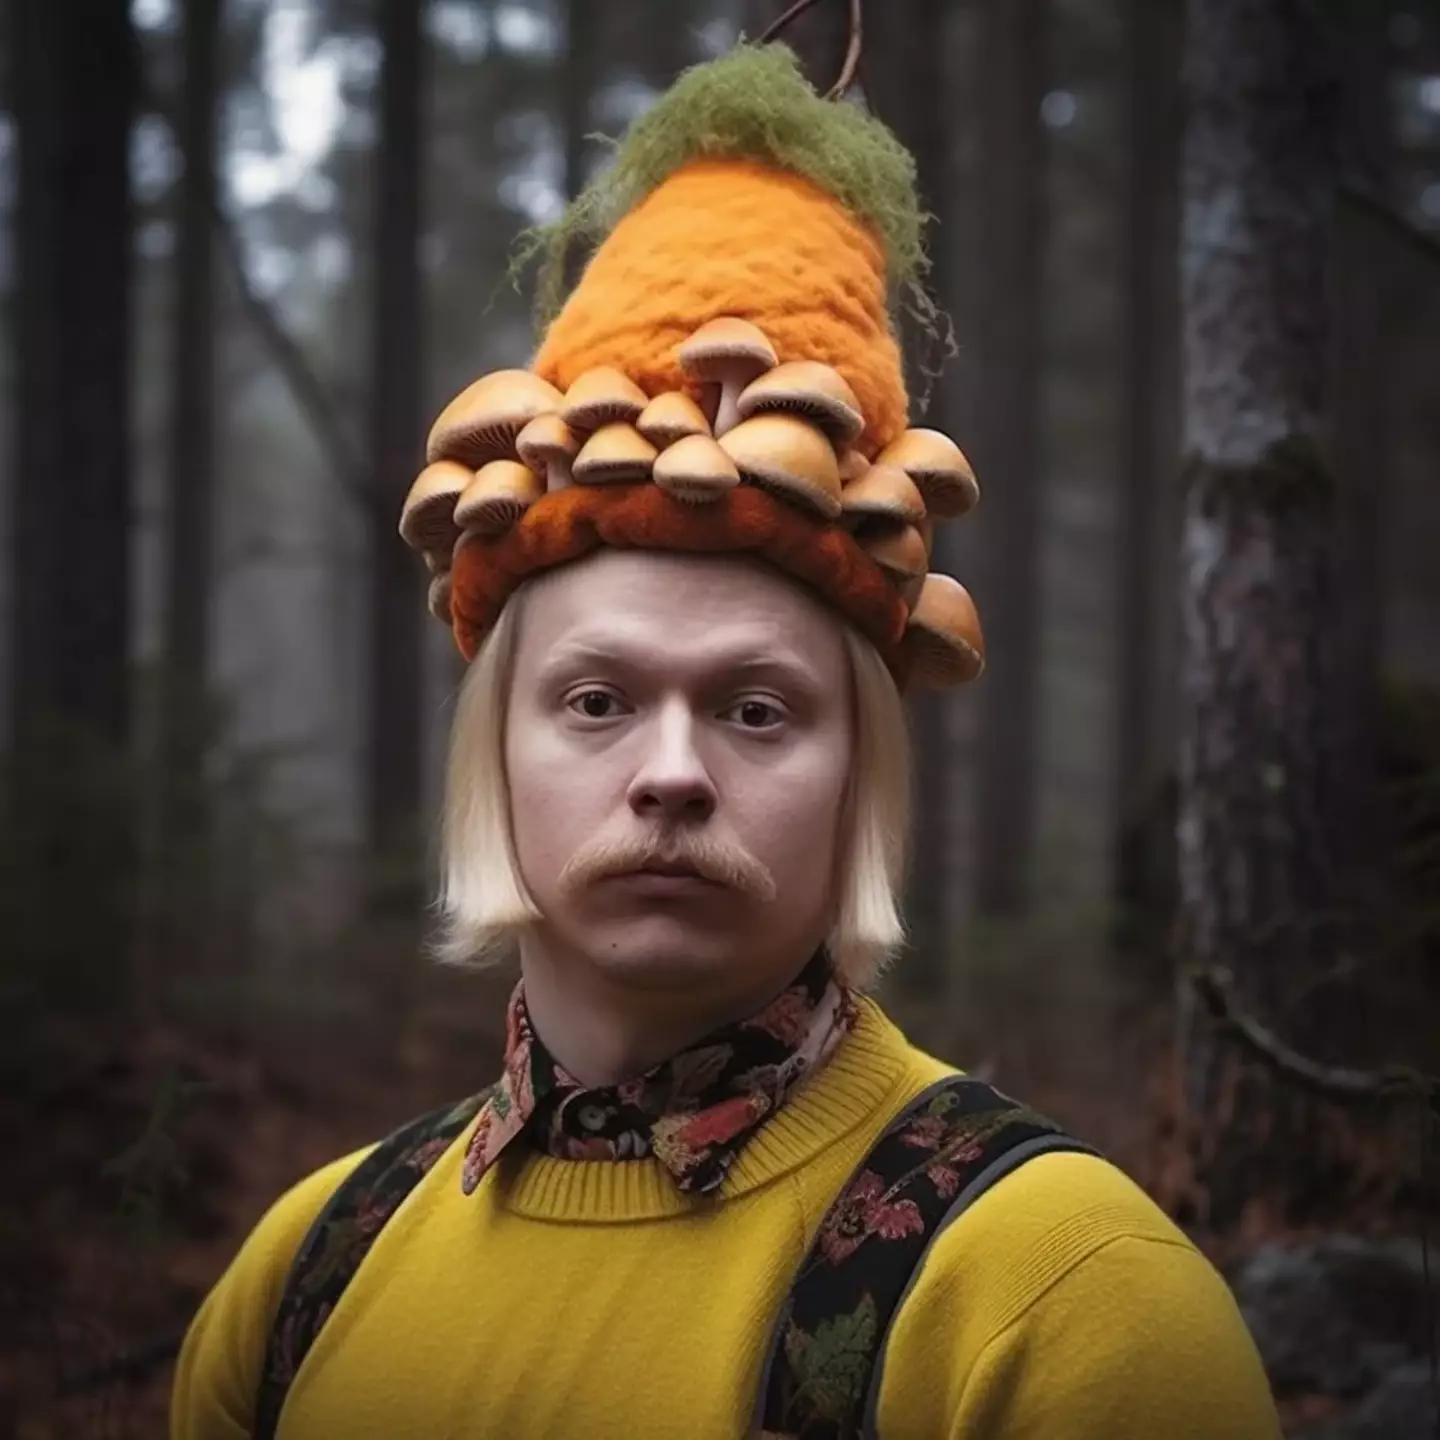 Yep, you're right, most people in Finland do wear mushroom hats.